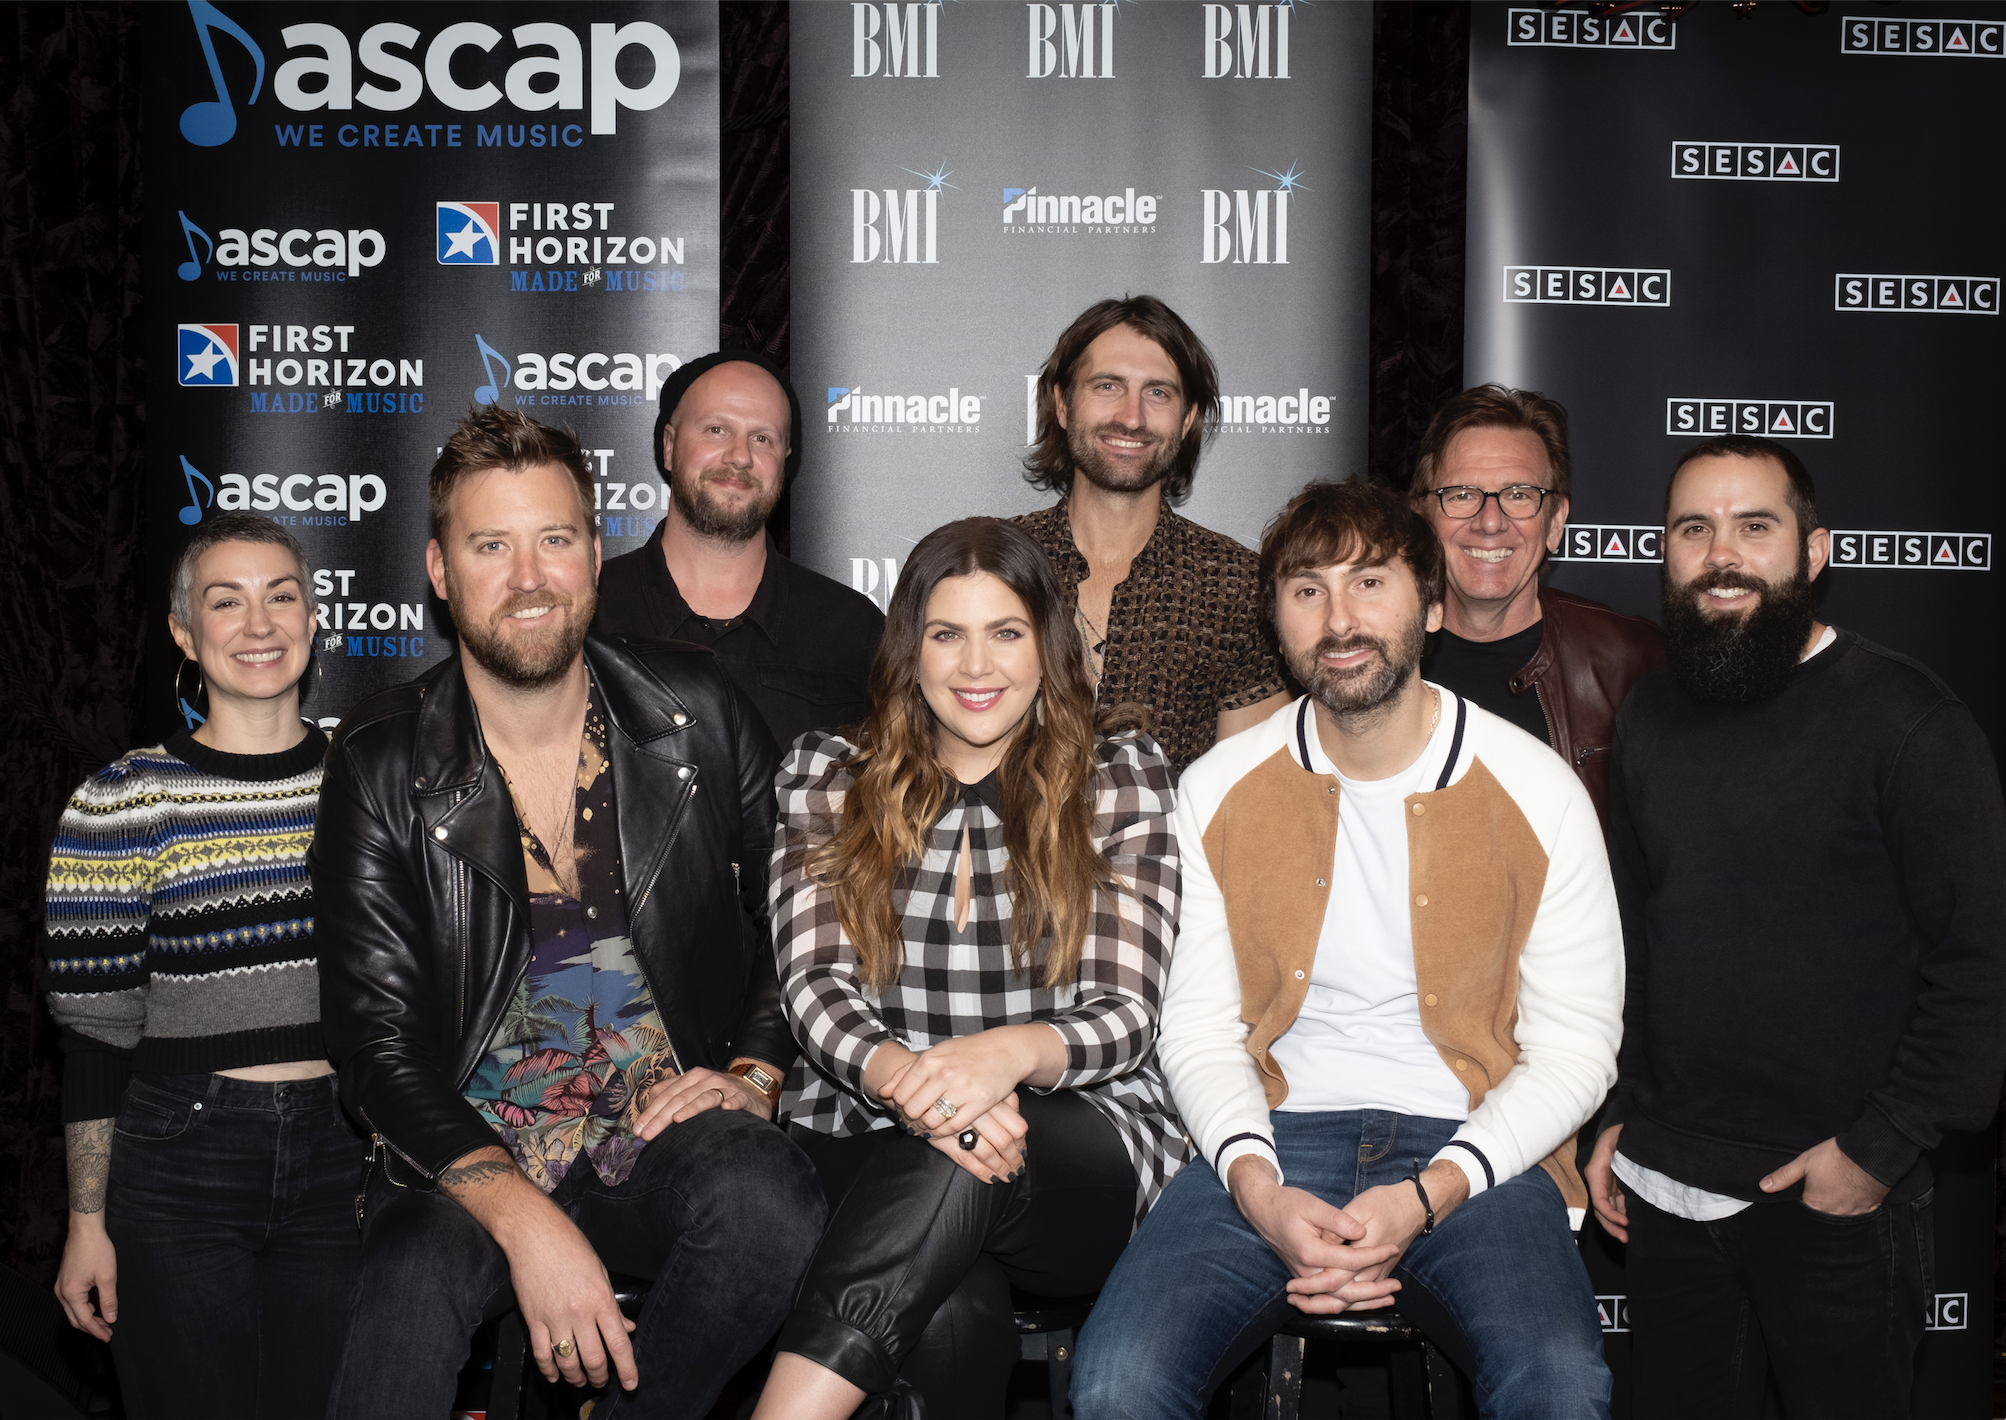 Lady Antebellum Wanted to “Turn Back Where They Started As A Band” When Making New Album ‘Oceans’